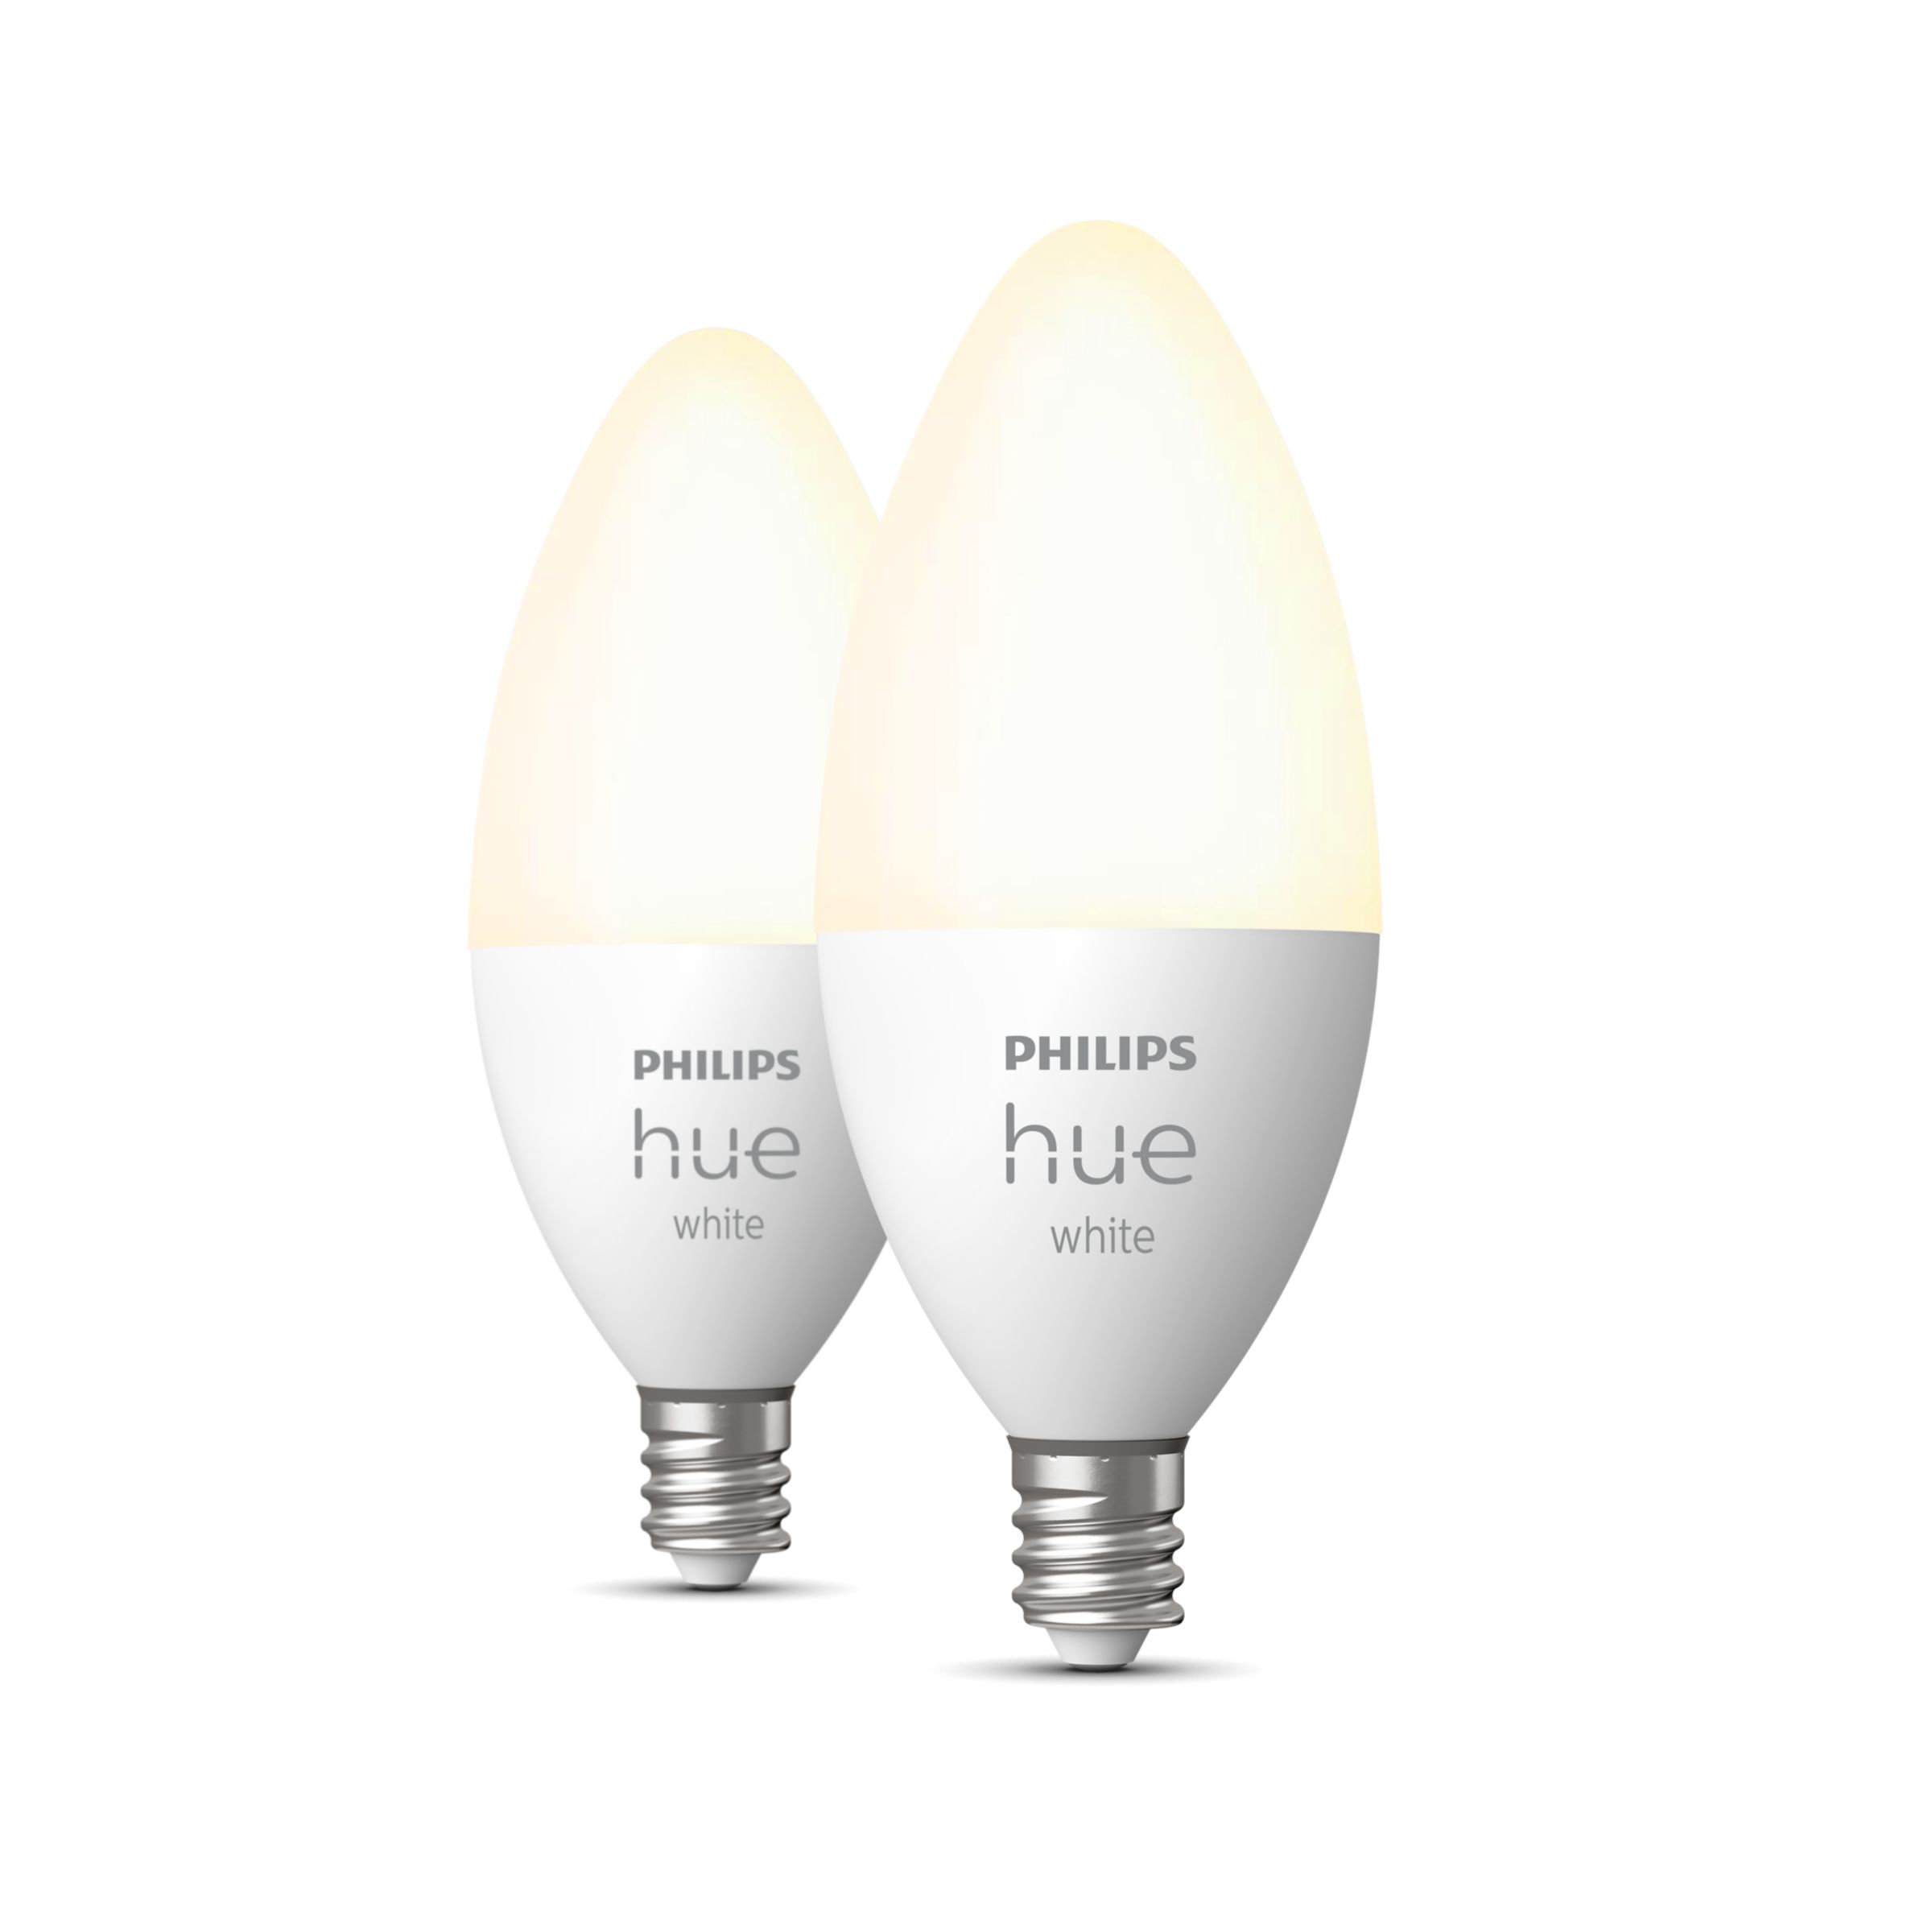  Philips Hue Smart 40W B39 Candle-Shaped LED Bulb - White and  Color Ambiance Color-Changing Light - 1 Pack - 450LM - E12 - Control with  Hue App - Works with Alexa